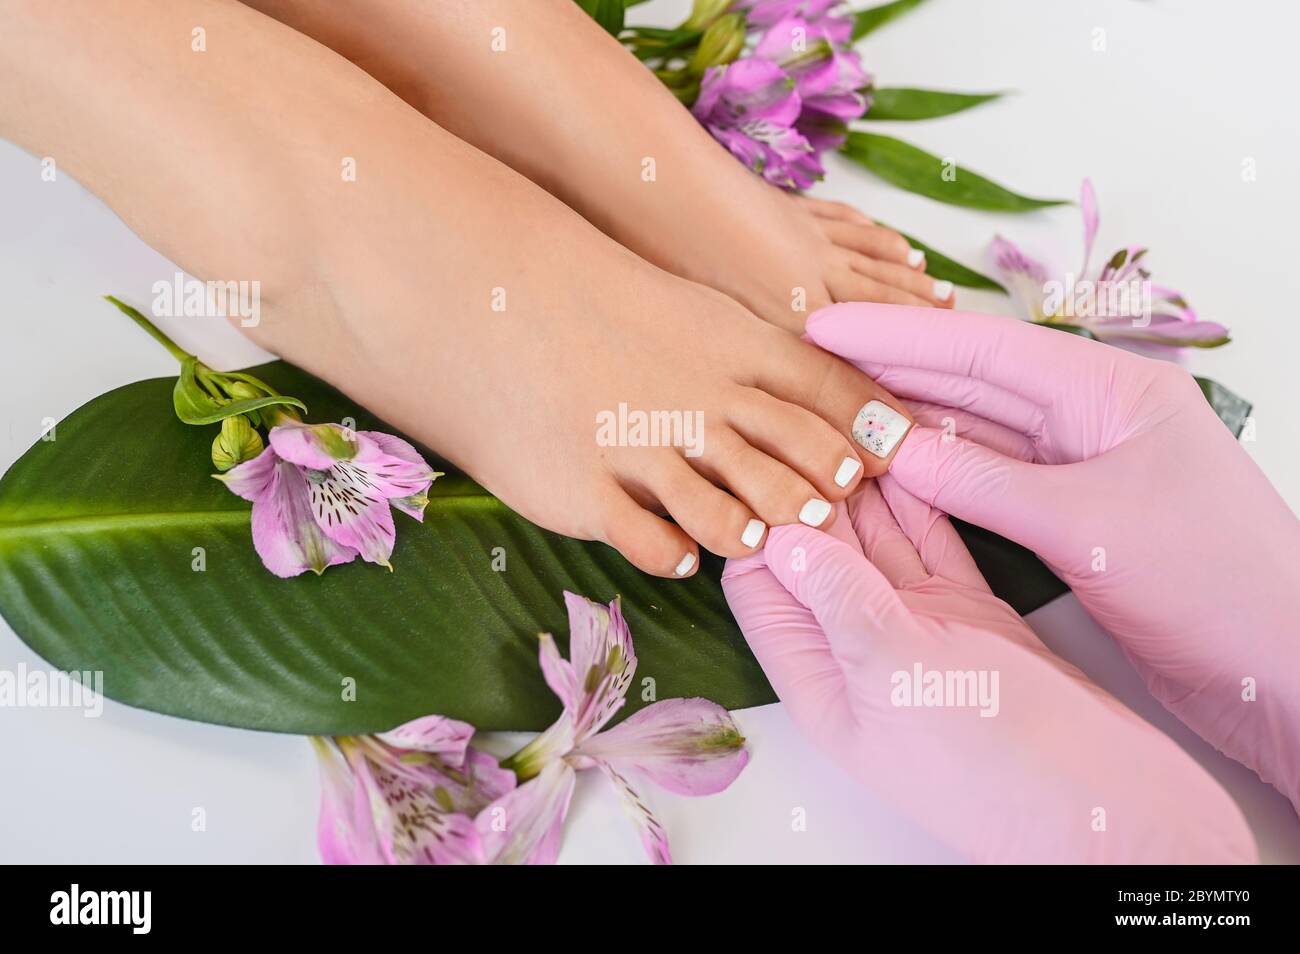 Teen with perfect pink toes